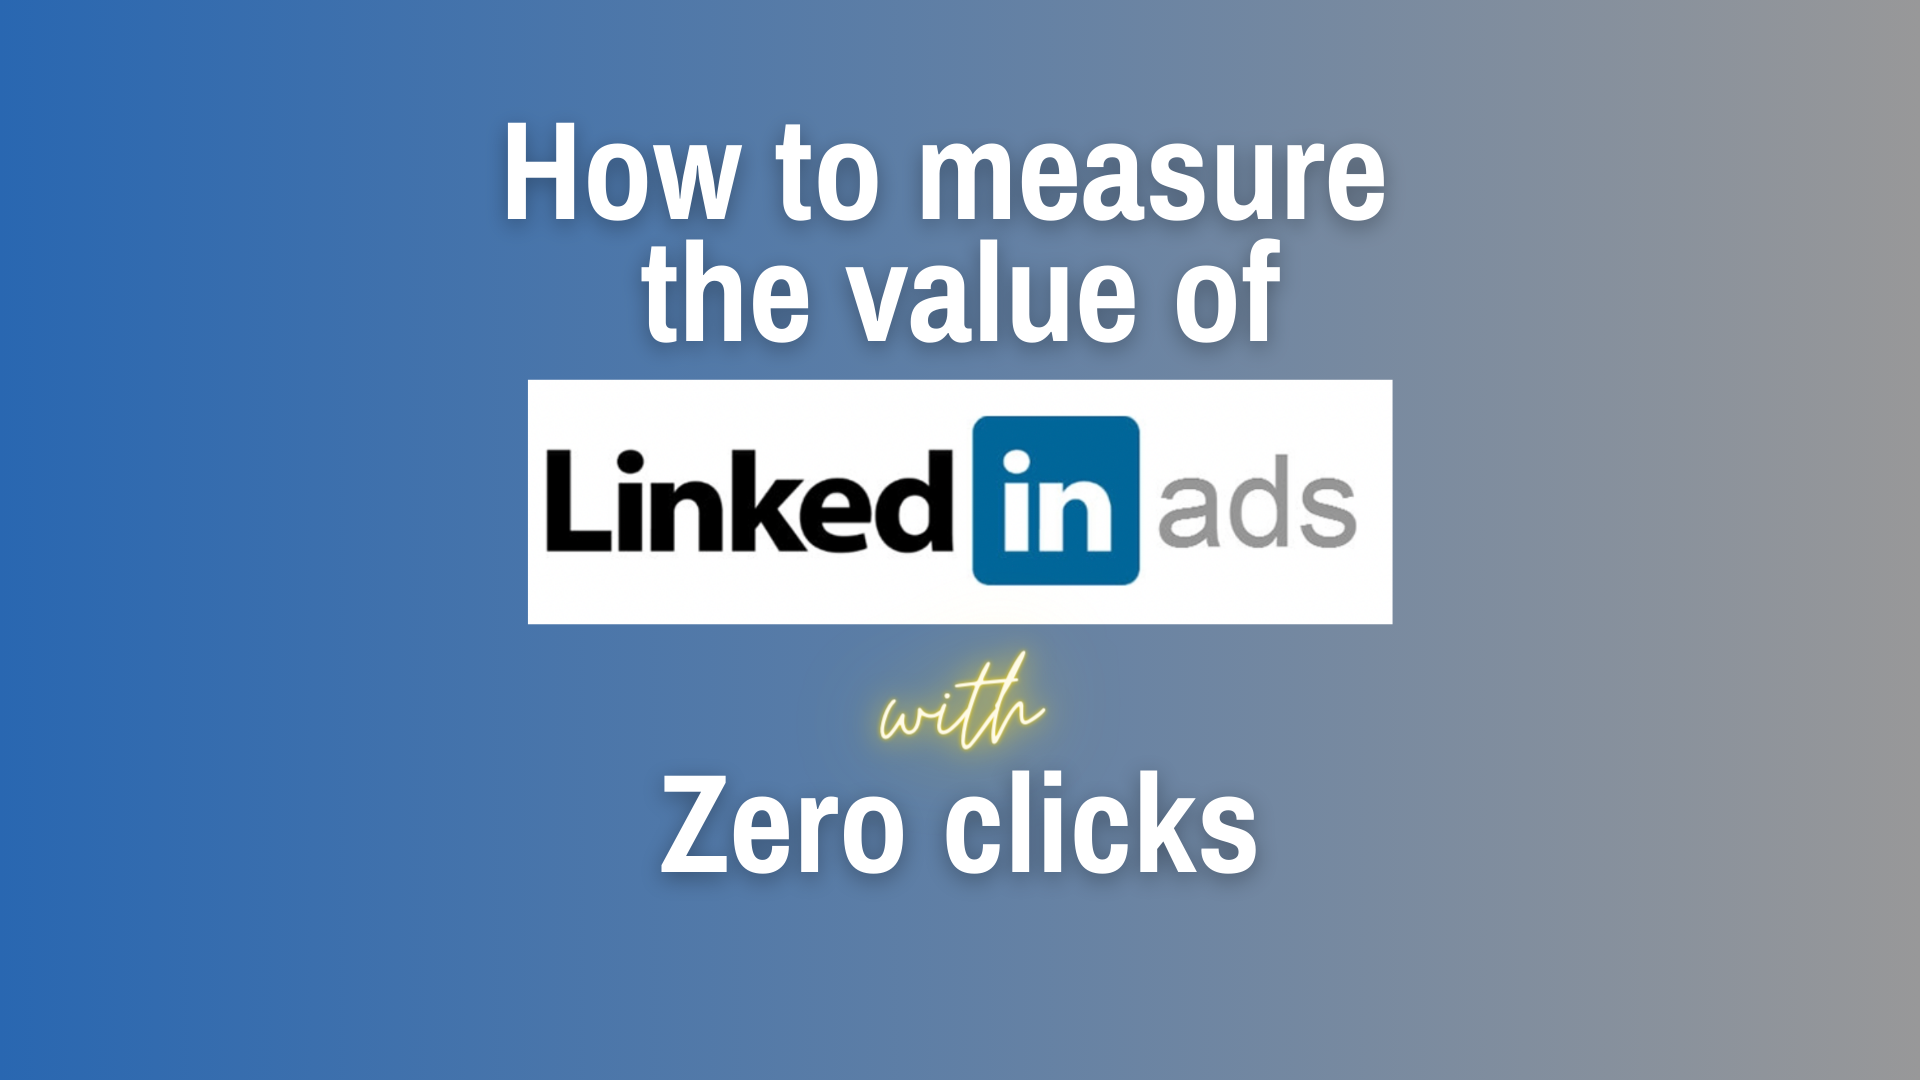 How to measure the value of LinkedIn with Zero clicks on a blended blue and red background